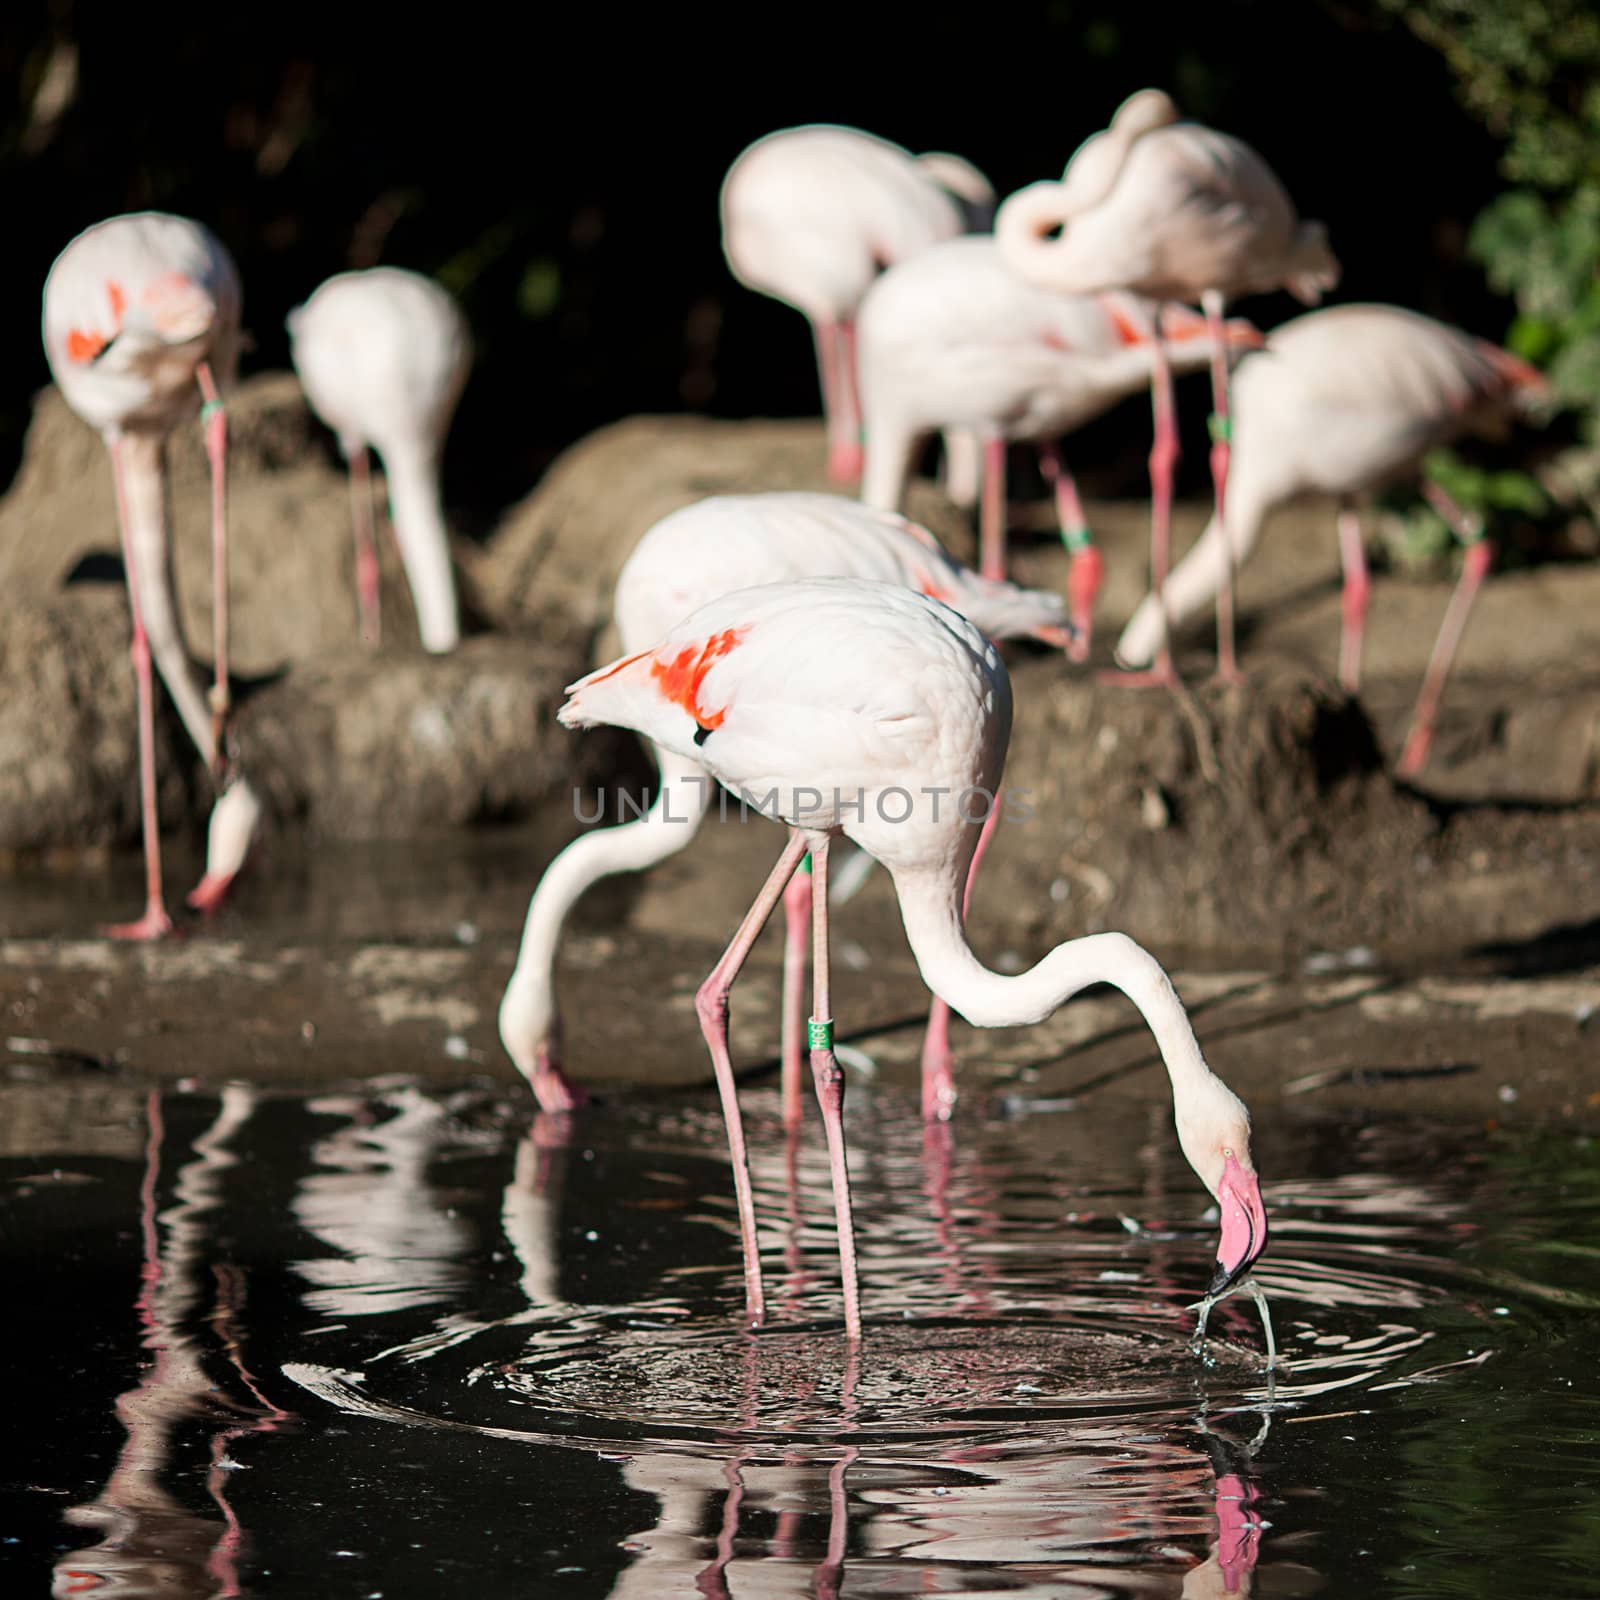 flamingo standing in water at the zoo